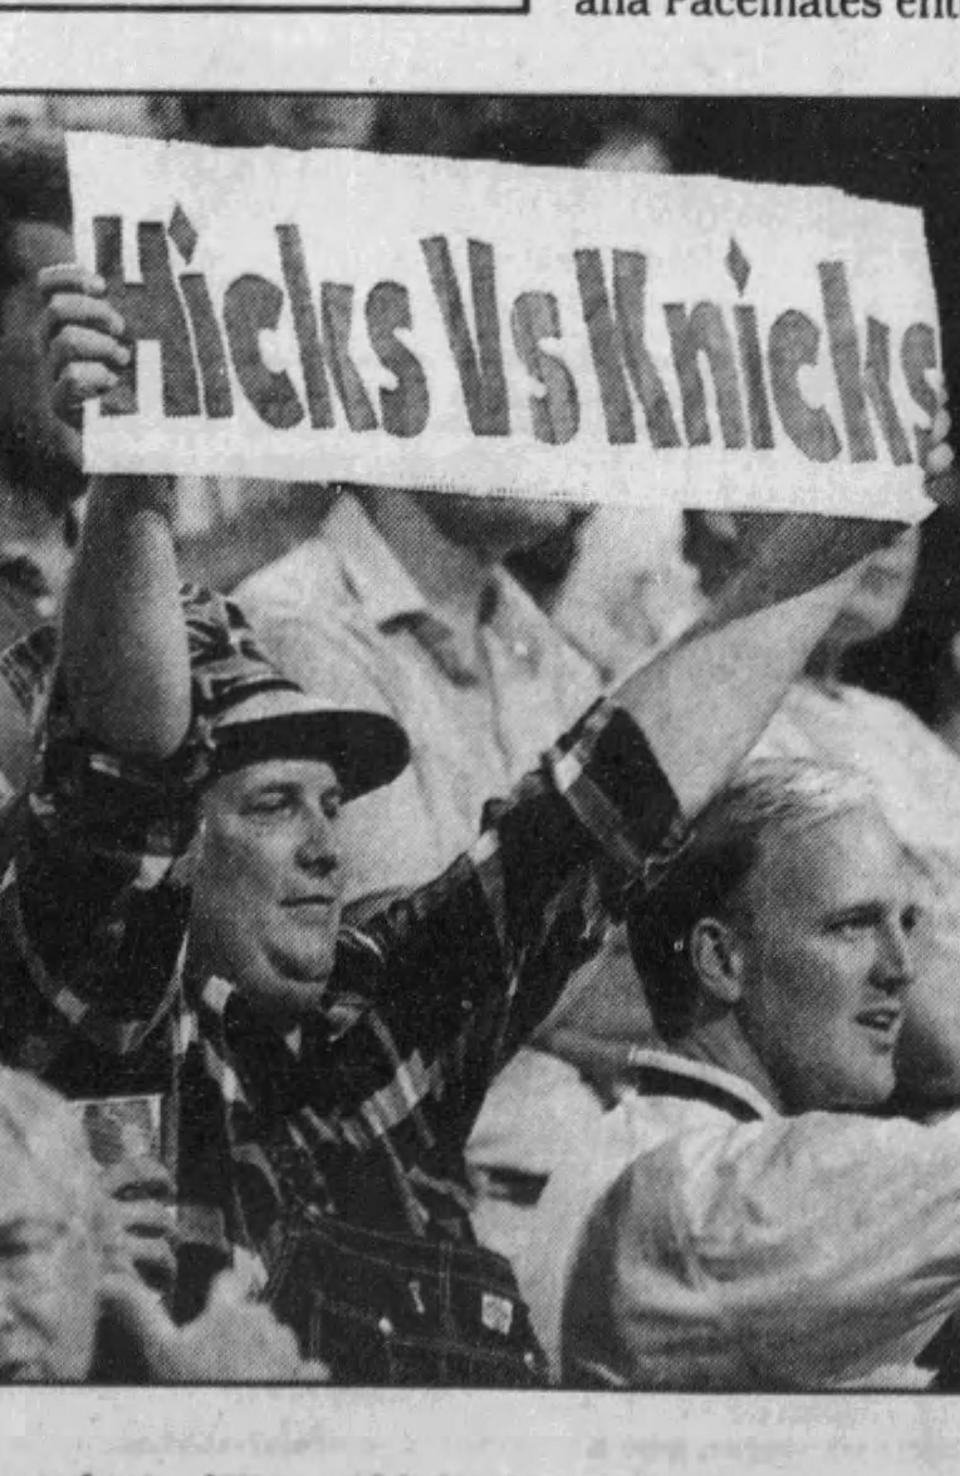 Indiana Pacers fans get into the spirit of 'Hicks vs. Knicks' in the 1994 NBA playoffs.